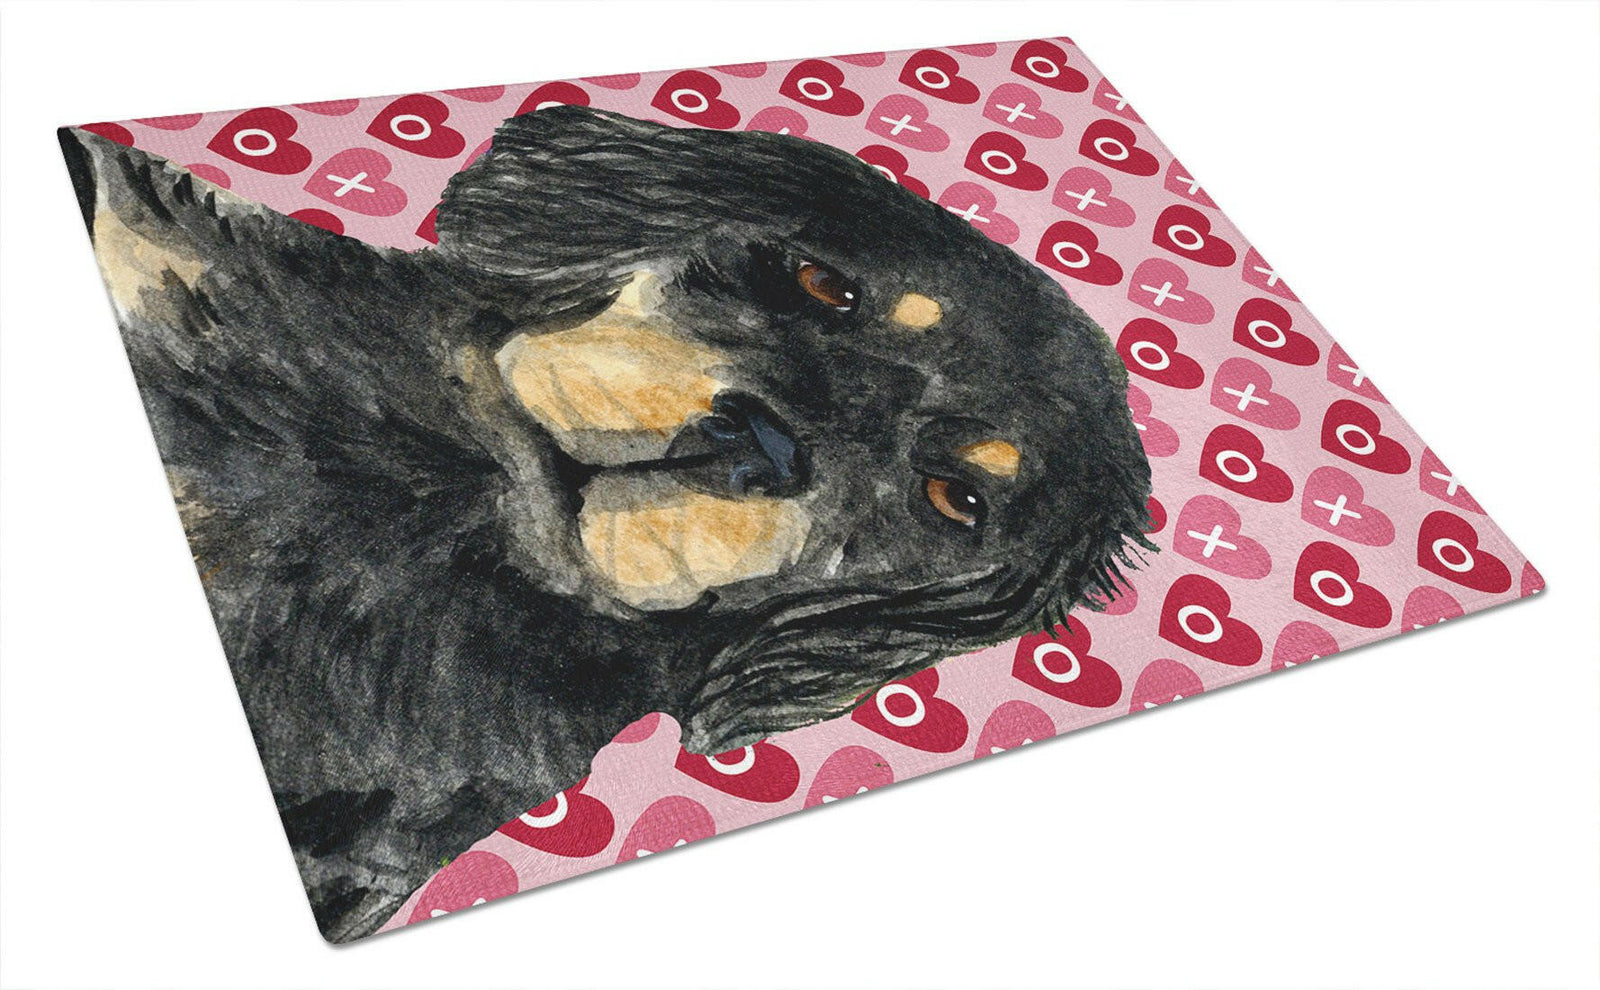 Gordon Setter Hearts Love and Valentine's Day Glass Cutting Board Large by Caroline's Treasures